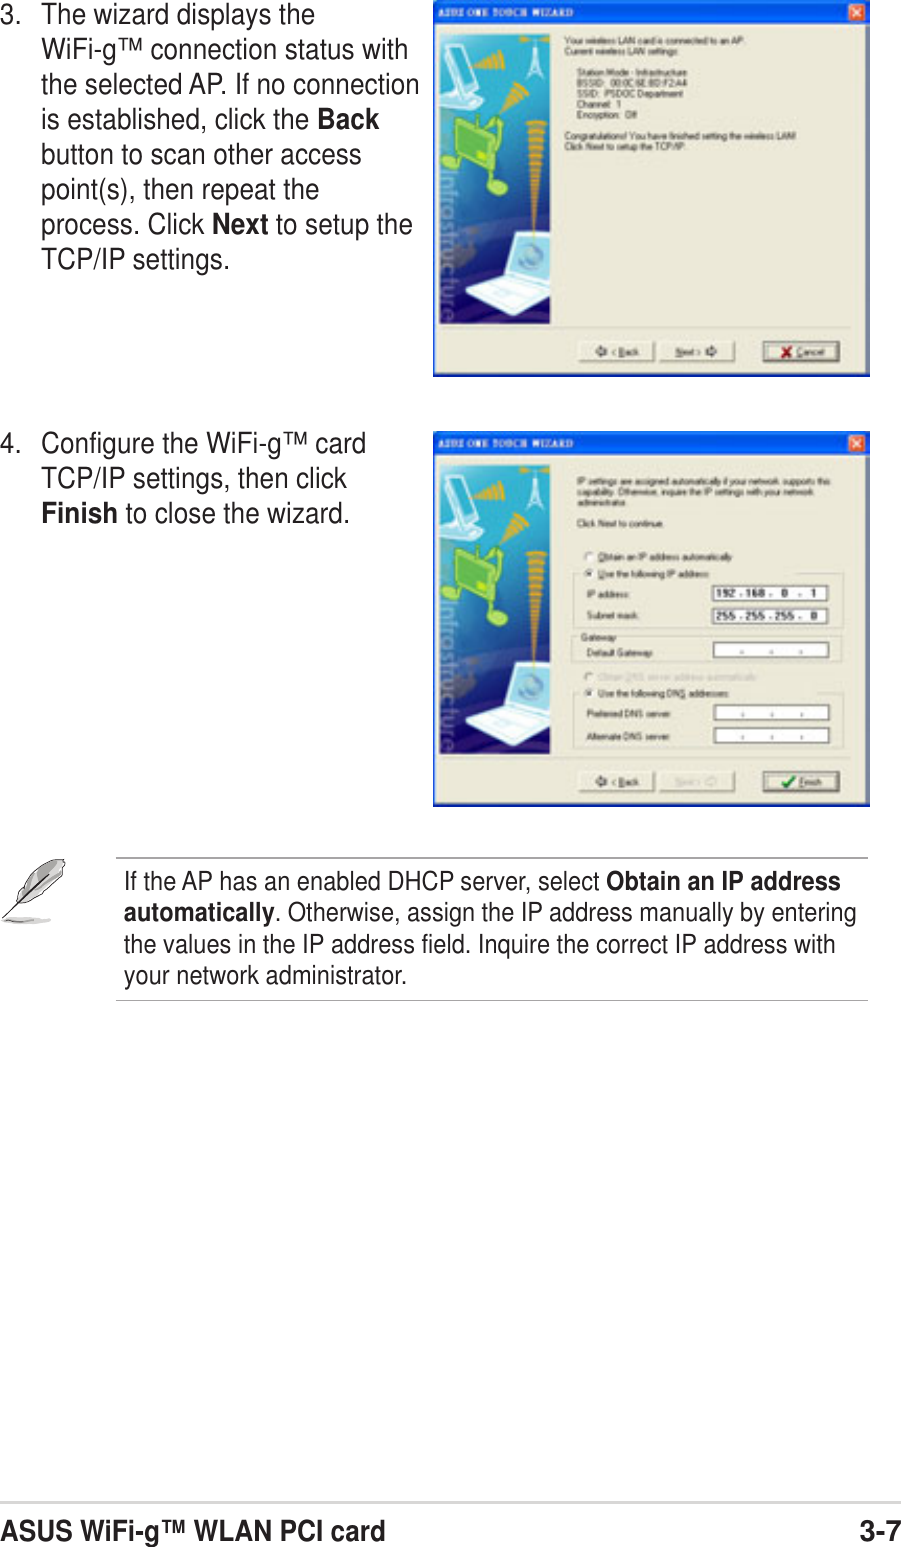 ASUS WiFi-g™ WLAN PCI card3-73. The wizard displays theWiFi-g™ connection status withthe selected AP. If no connectionis established, click the Backbutton to scan other accesspoint(s), then repeat theprocess. Click Next to setup theTCP/IP settings.4. Configure the WiFi-g™ cardTCP/IP settings, then clickFinish to close the wizard.If the AP has an enabled DHCP server, select Obtain an IP addressautomatically. Otherwise, assign the IP address manually by enteringthe values in the IP address field. Inquire the correct IP address withyour network administrator.